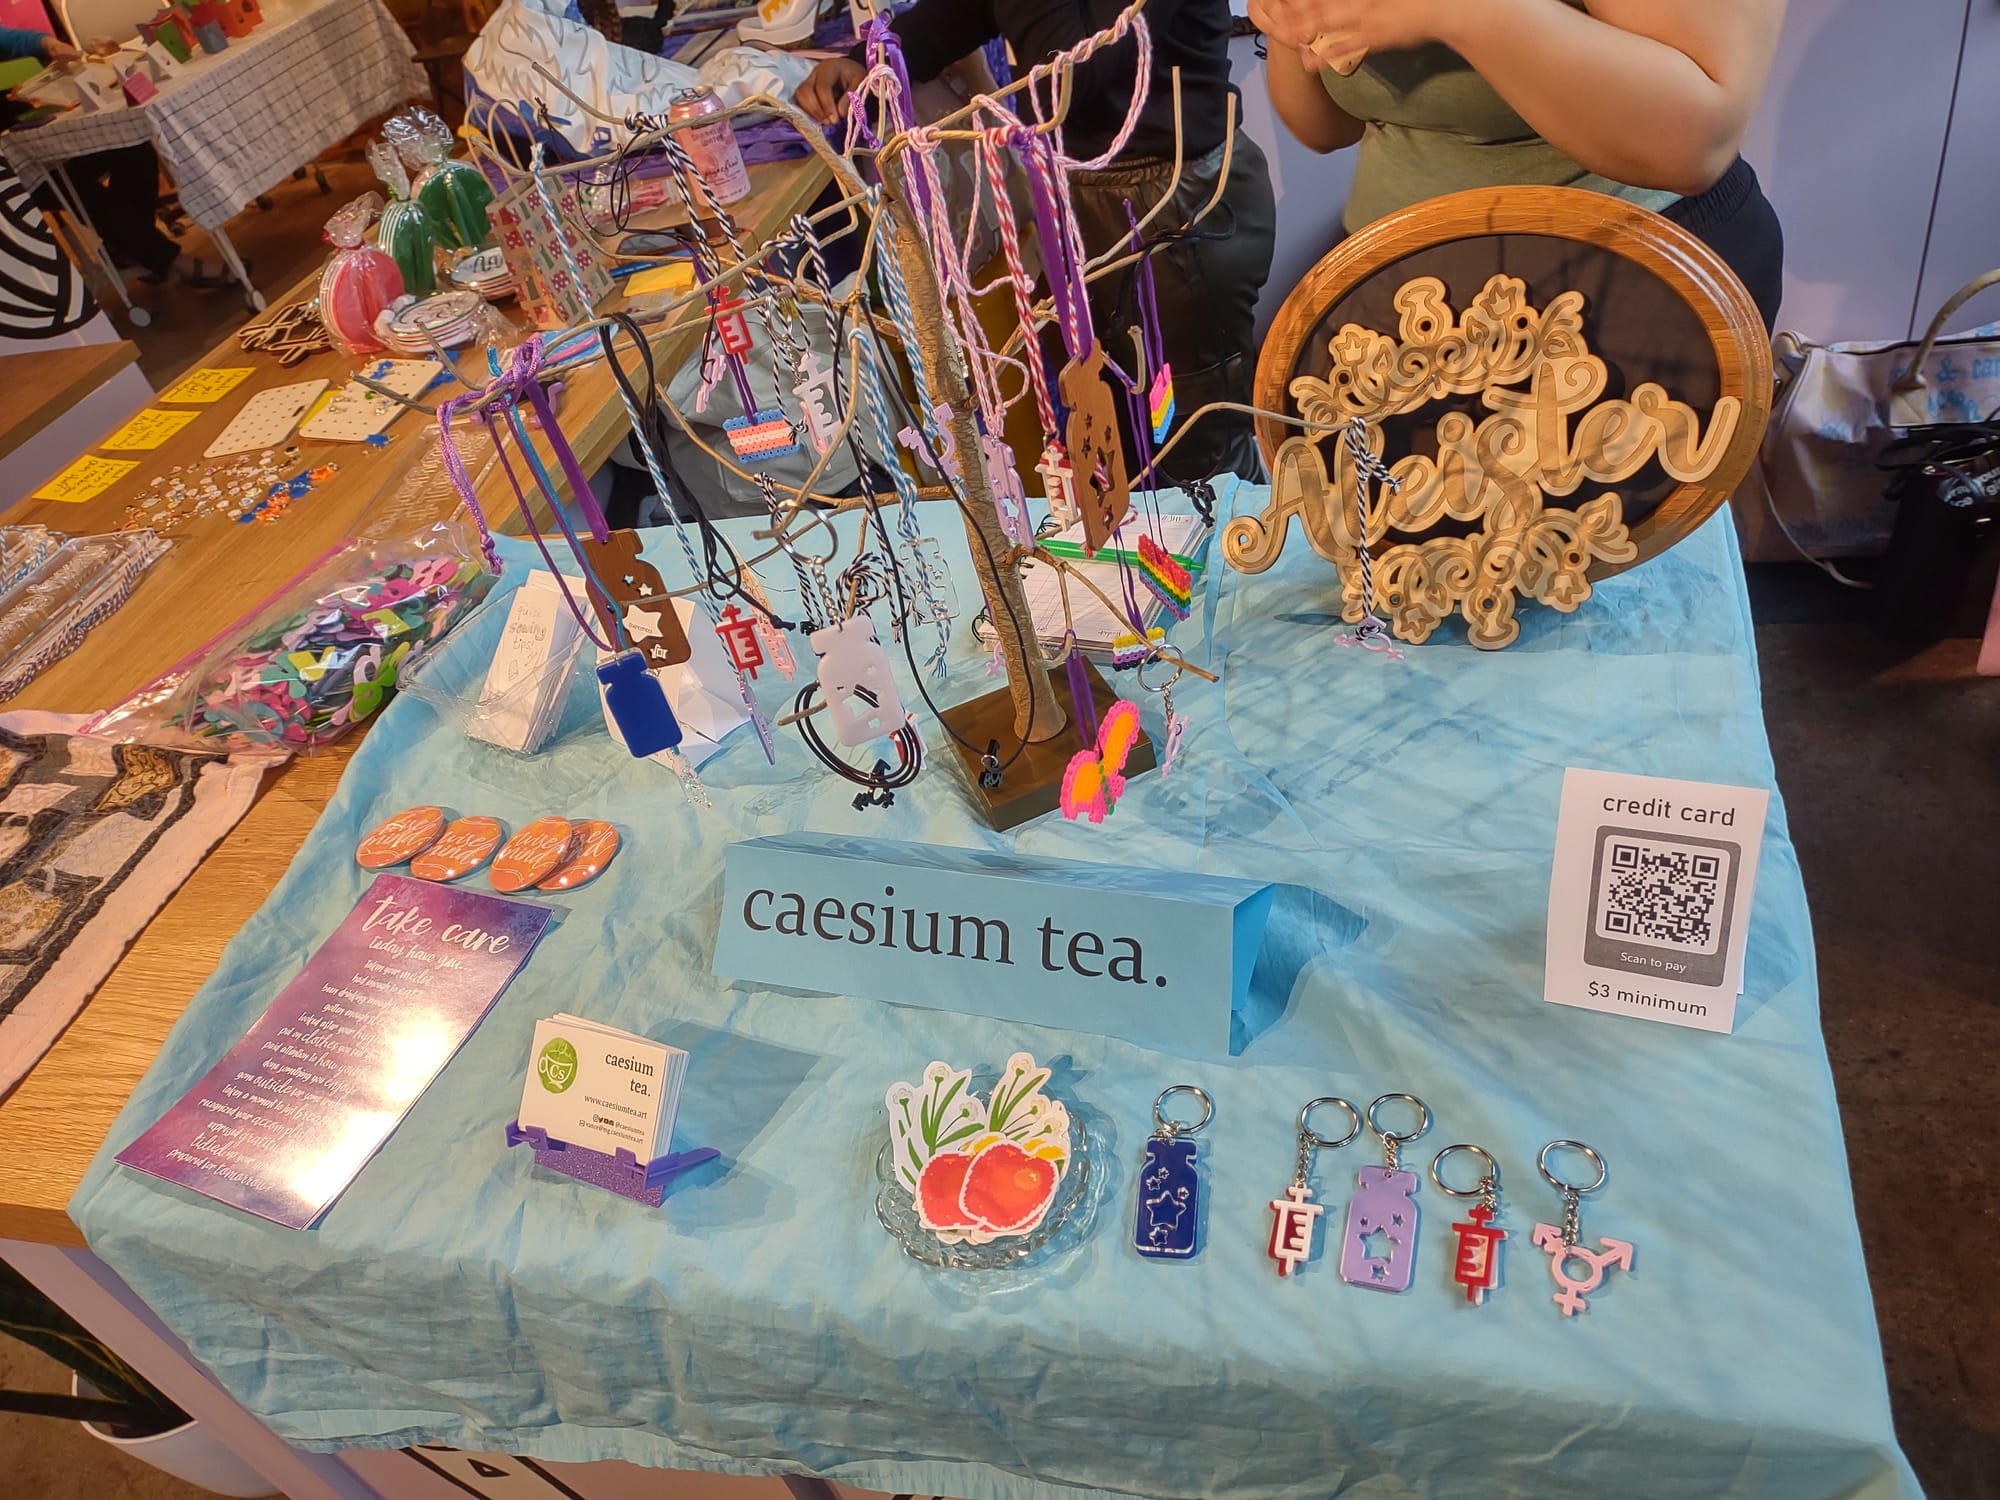 A craft fair table display. There's a light blue sheet over the table and a folded piece of paper labeled "caesium tea" in the center. Several items from the above images are scattered around the table, with necklaces and ornaments hanging from a small tree.